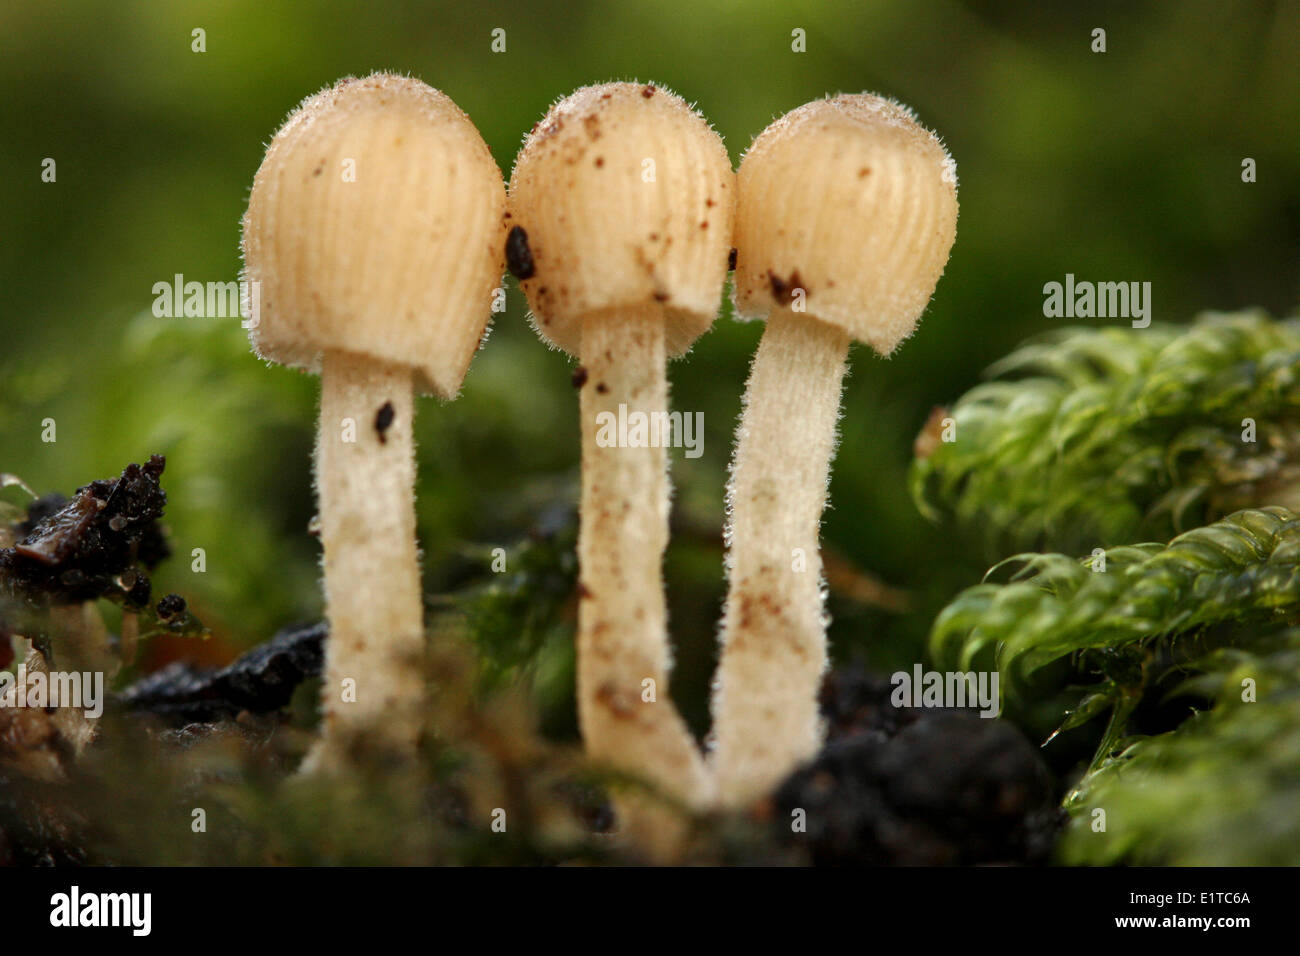 sideview of three young specimens on rotting wood Stock Photo